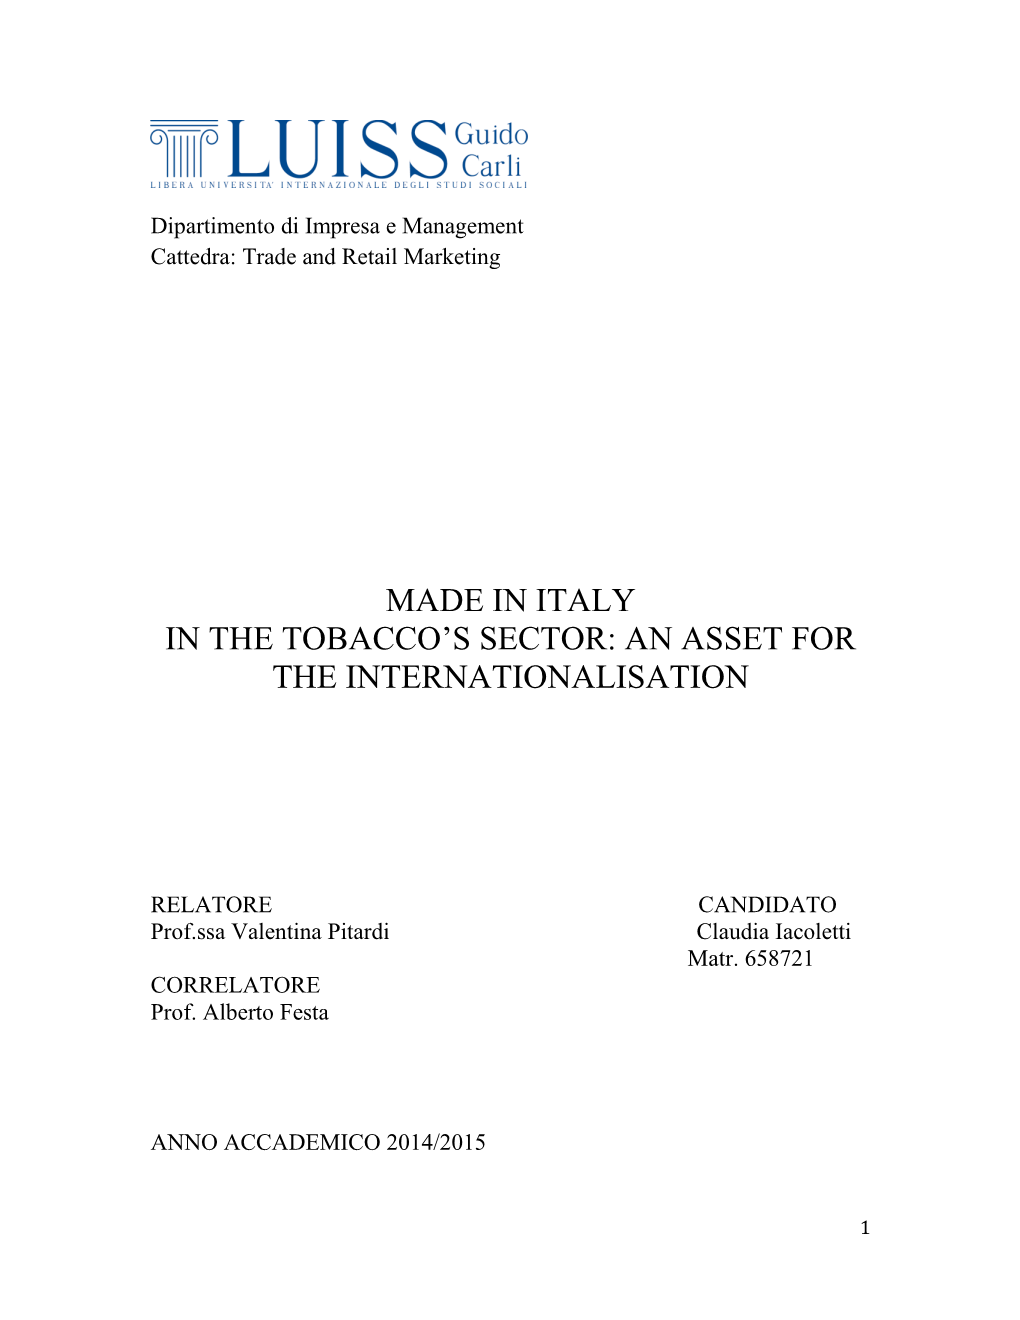 Made in Italy in the Tobacco's Sector: an Asset for The